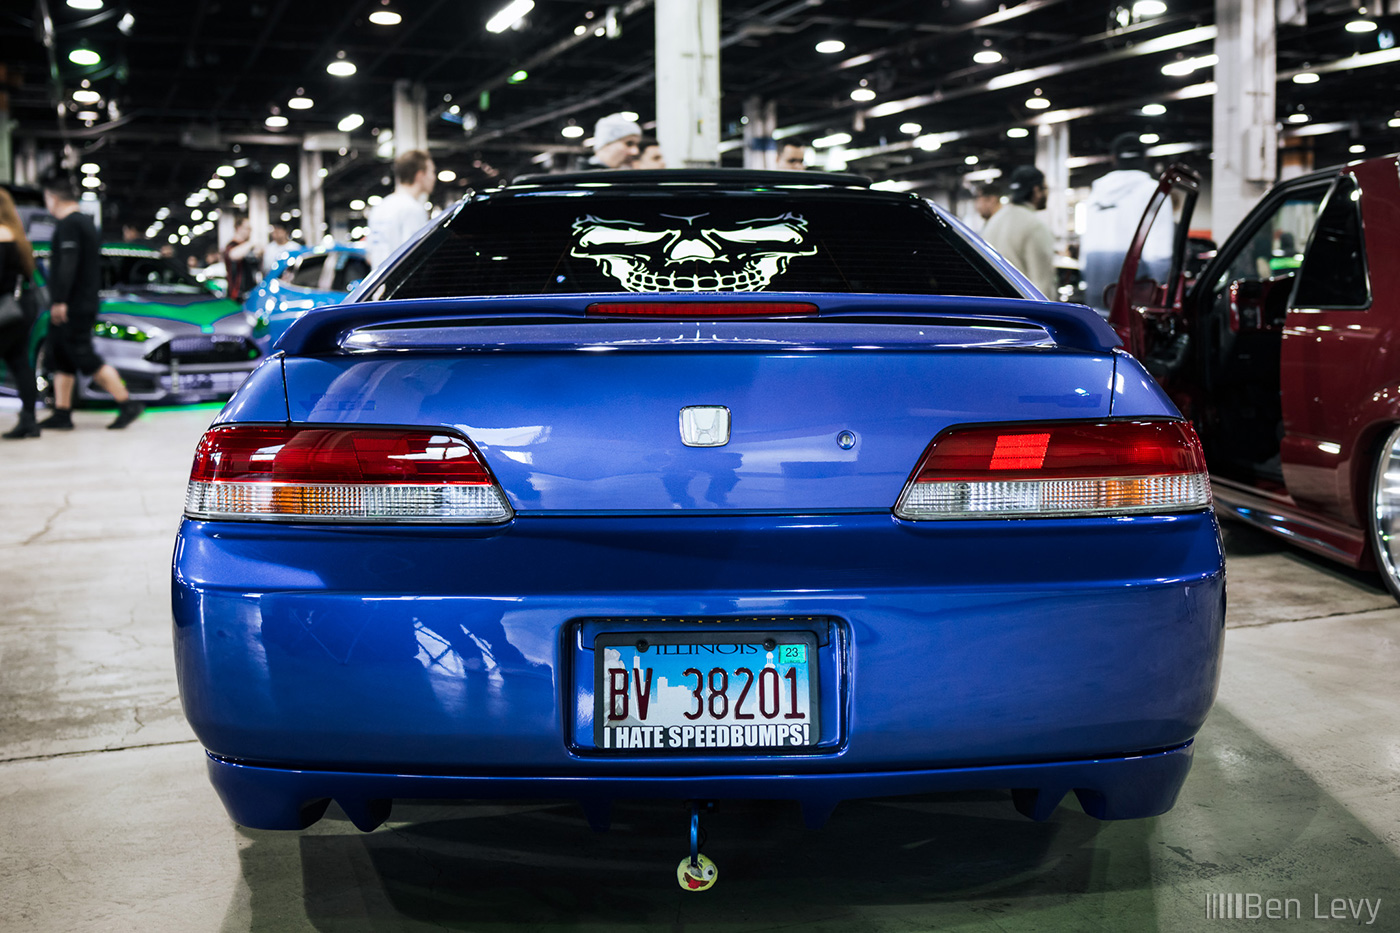 Tail Lights of Blue Honda Prelude